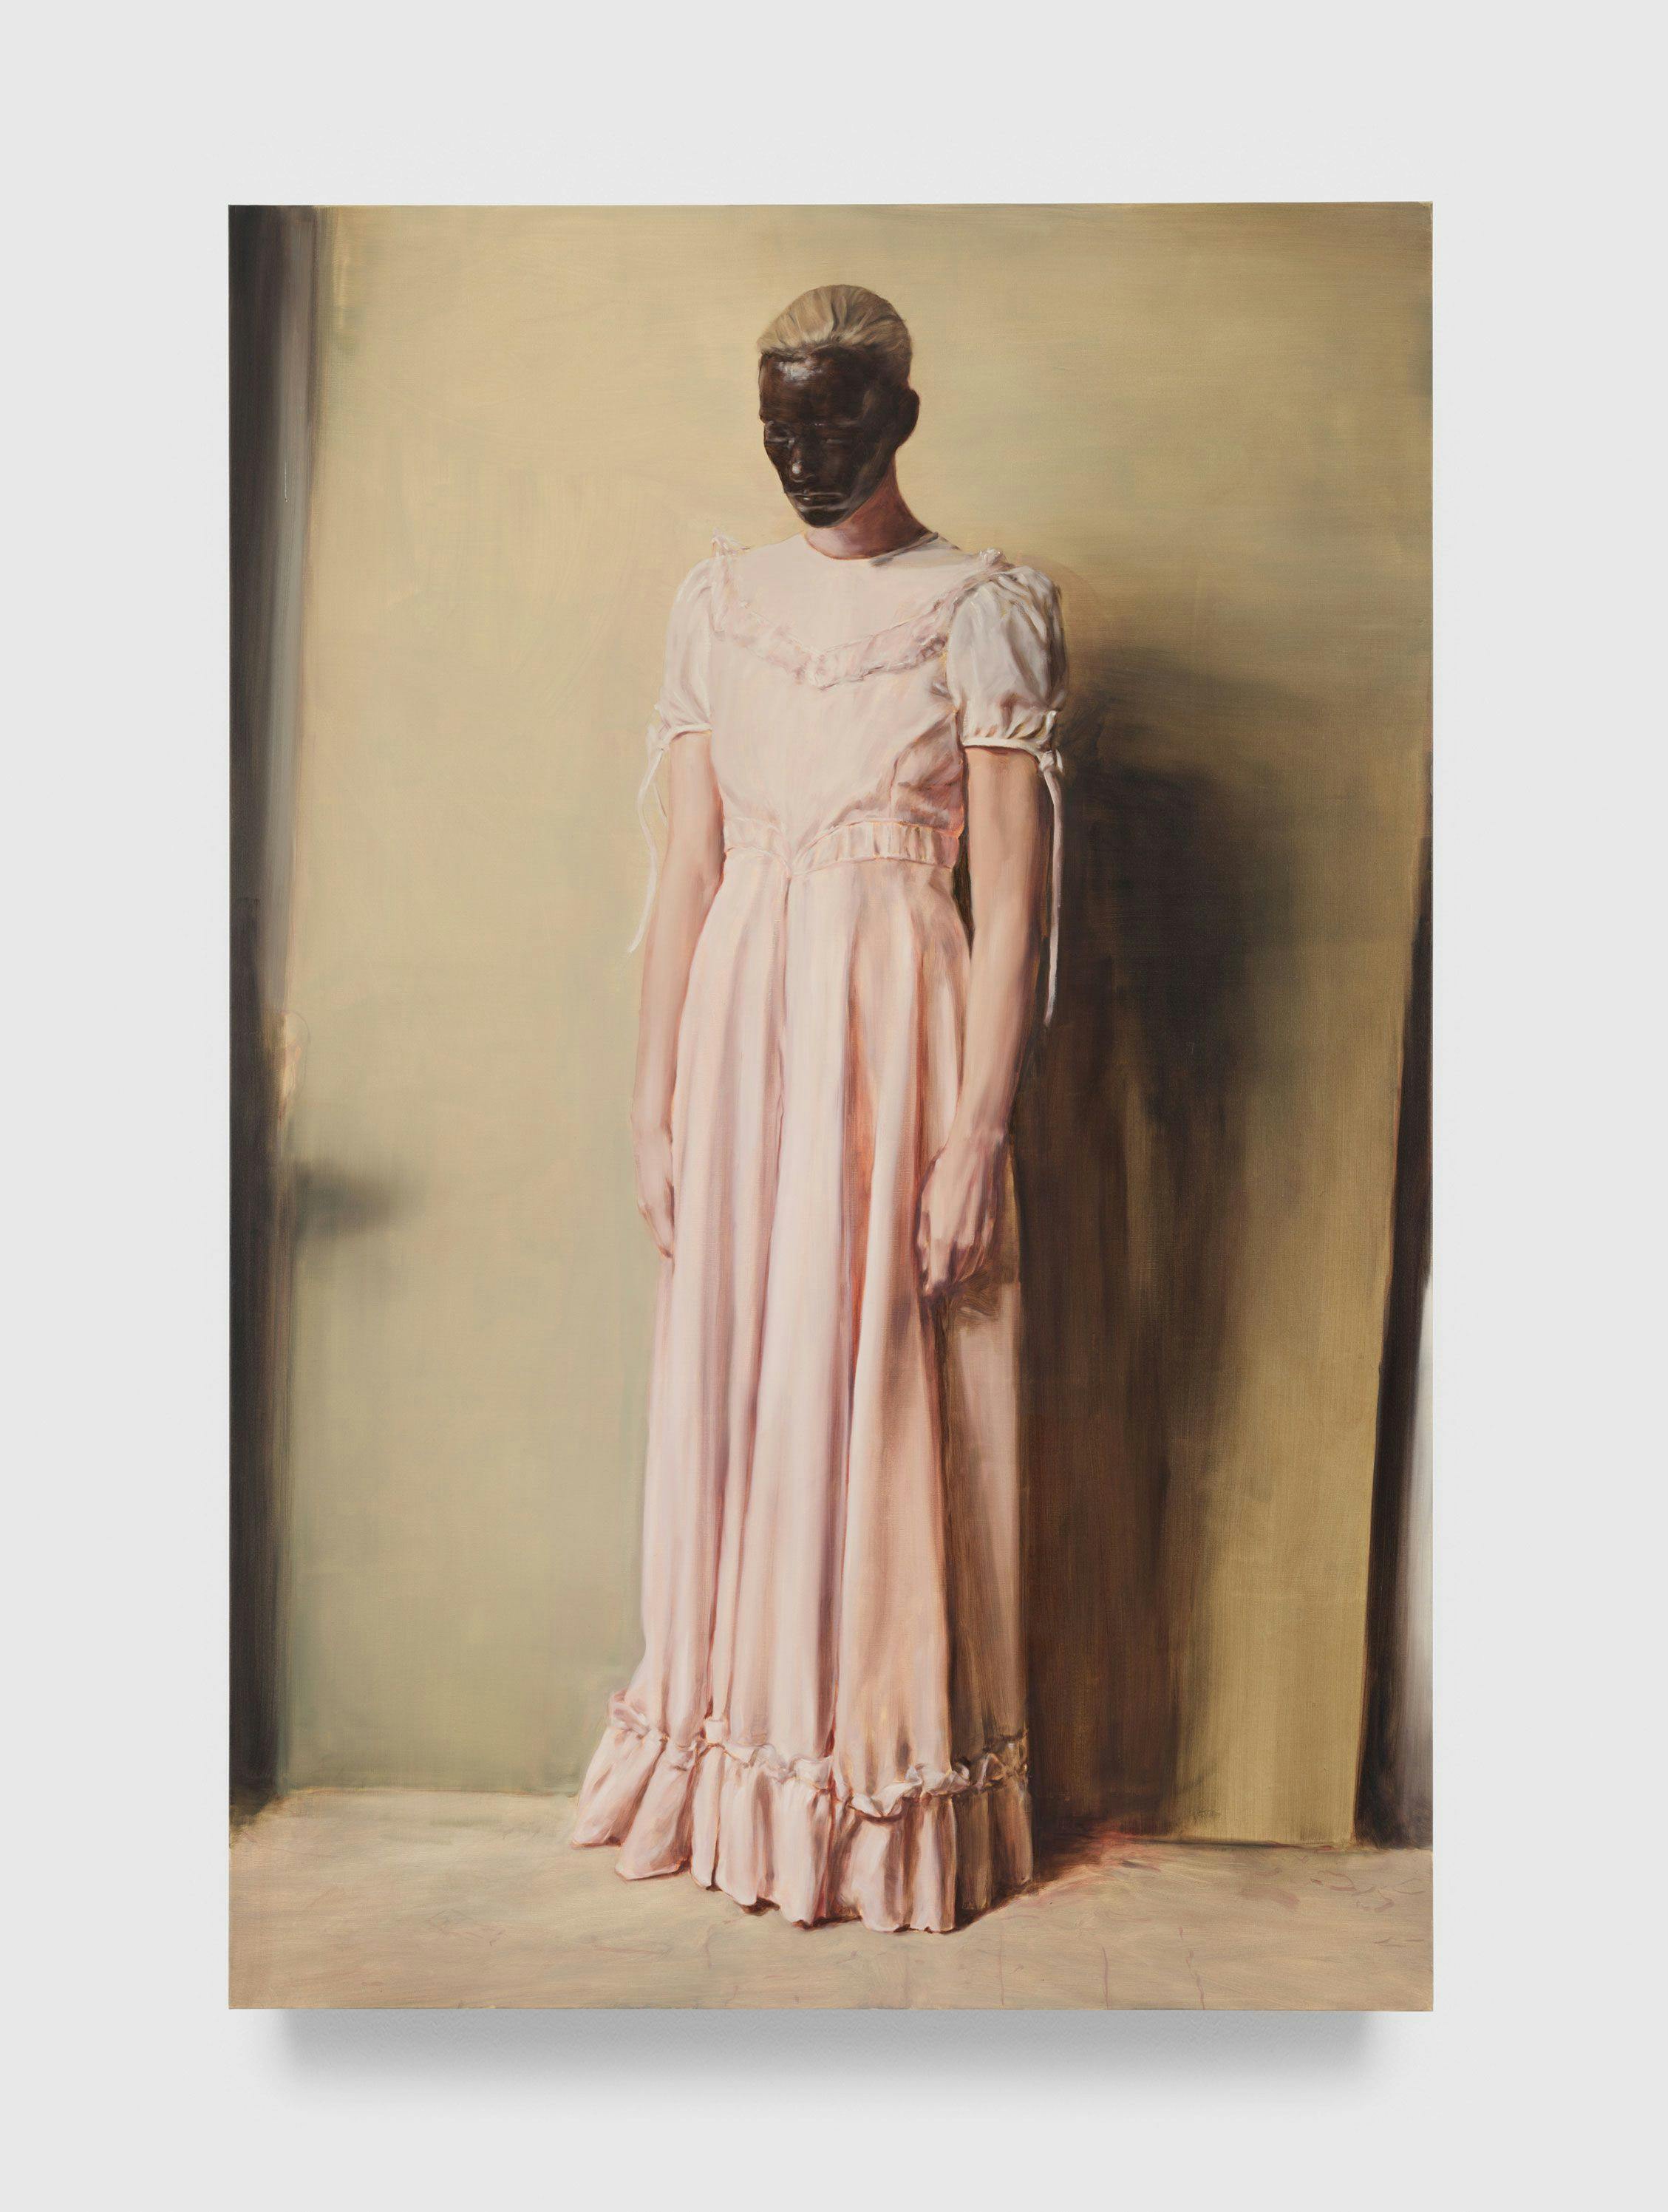 A painting by Michaël Borremans, titled The Angel, dated 2013.